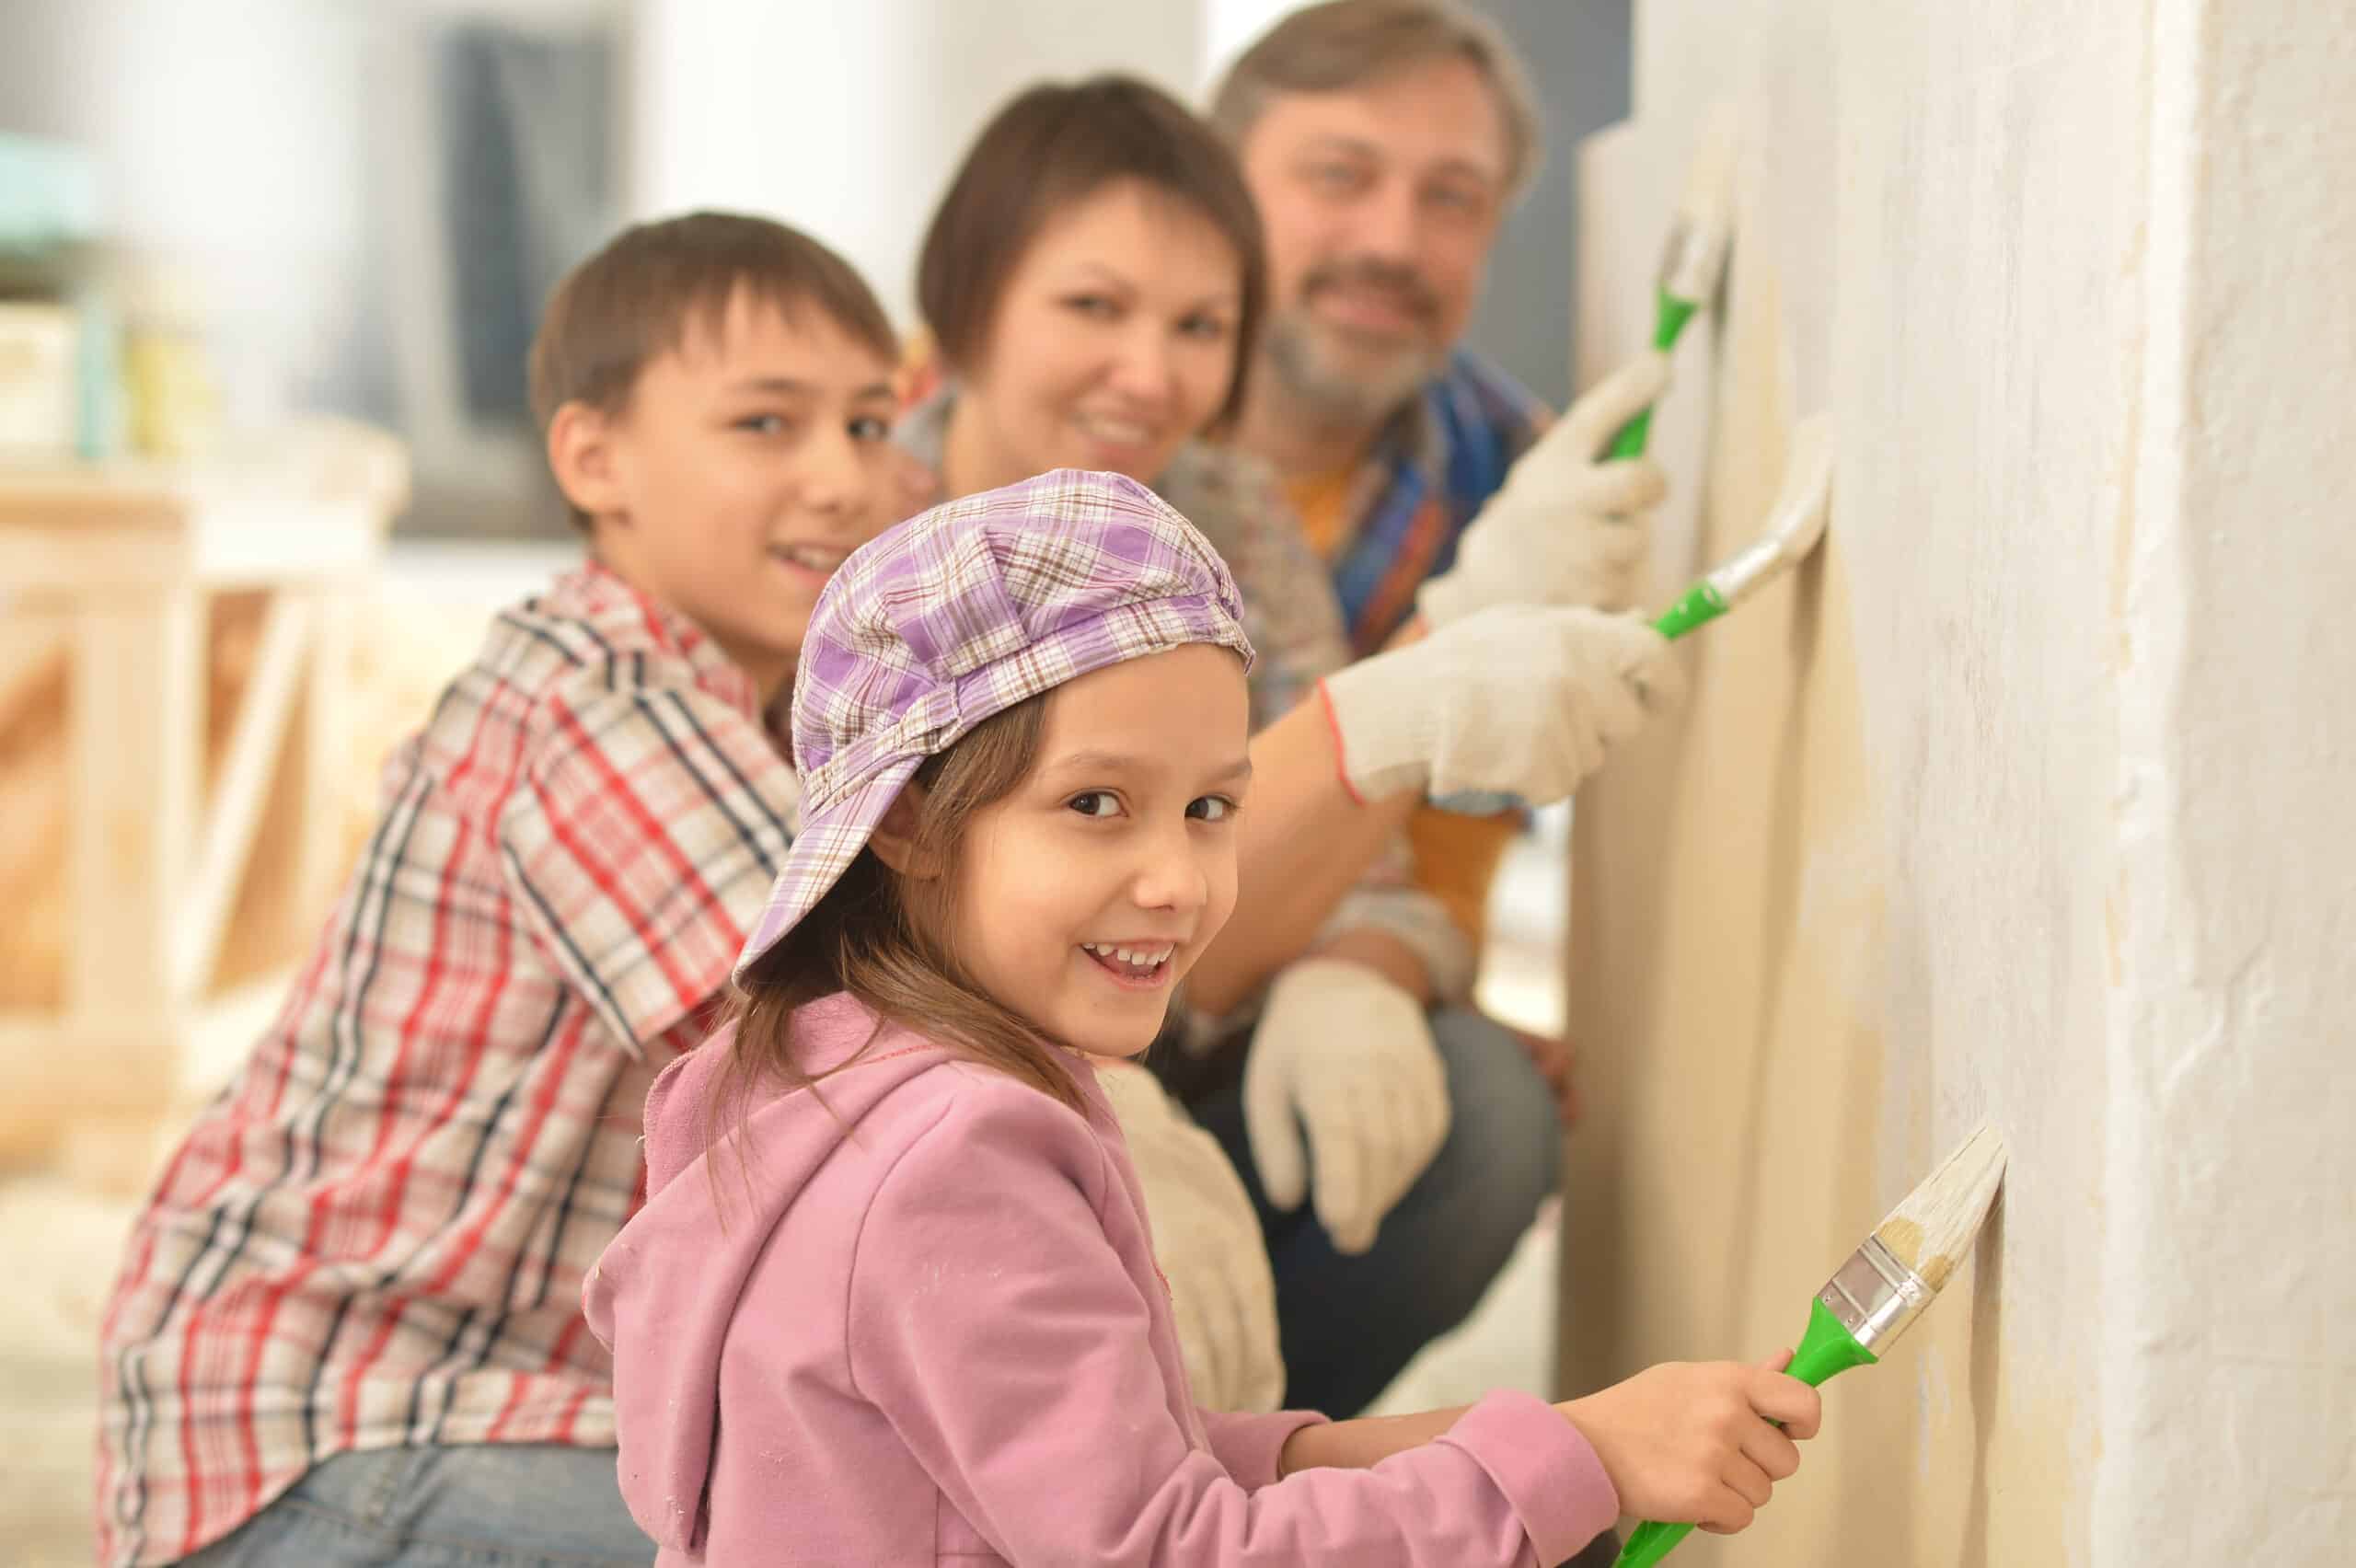 A Guide To Remodeling And Renovating With Kids